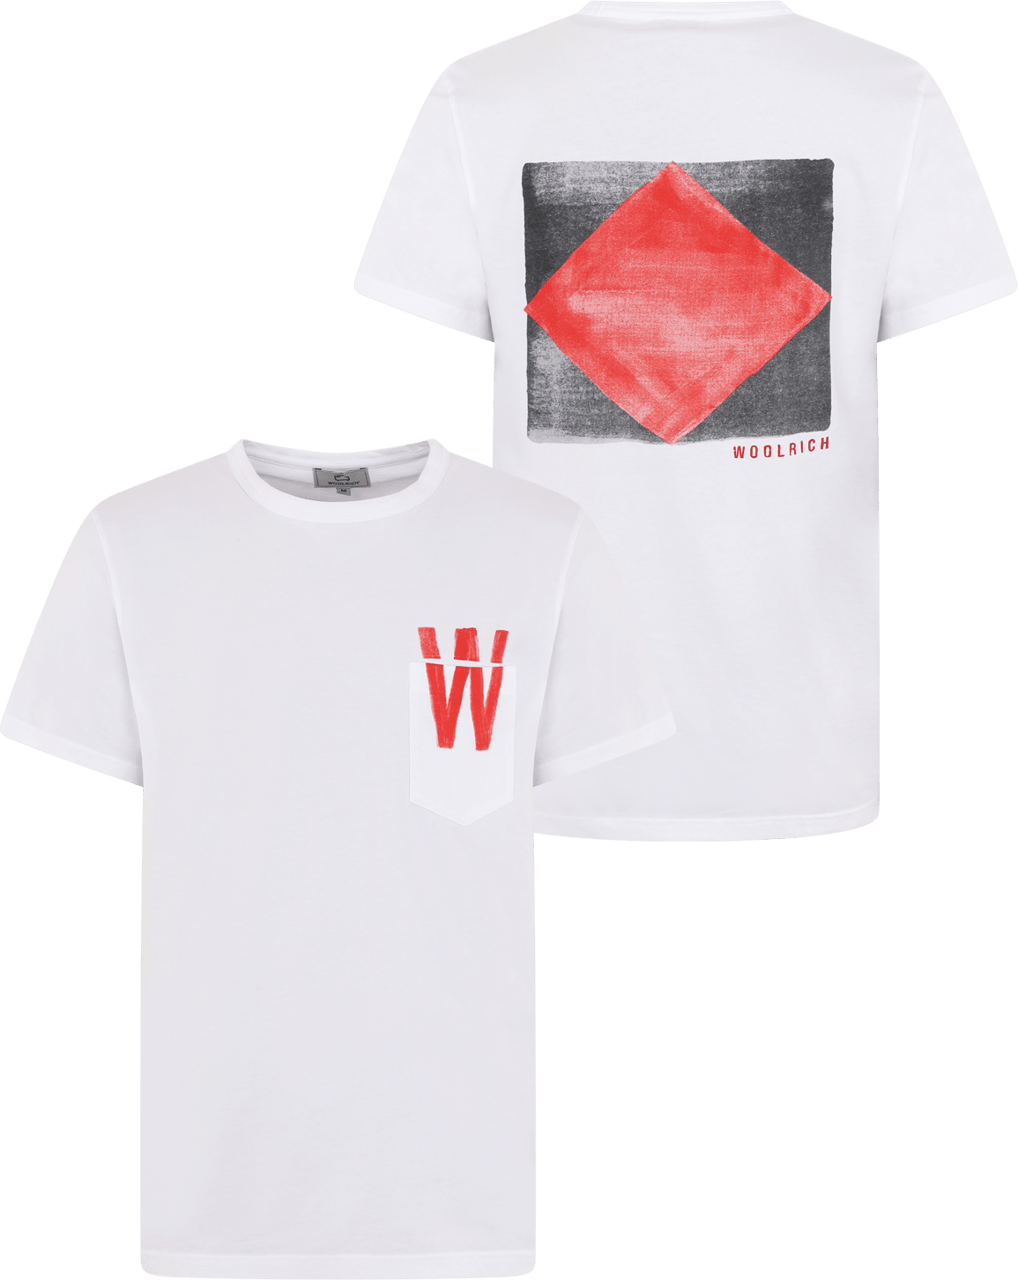 Woolrich Flag White T-shirt White Wit